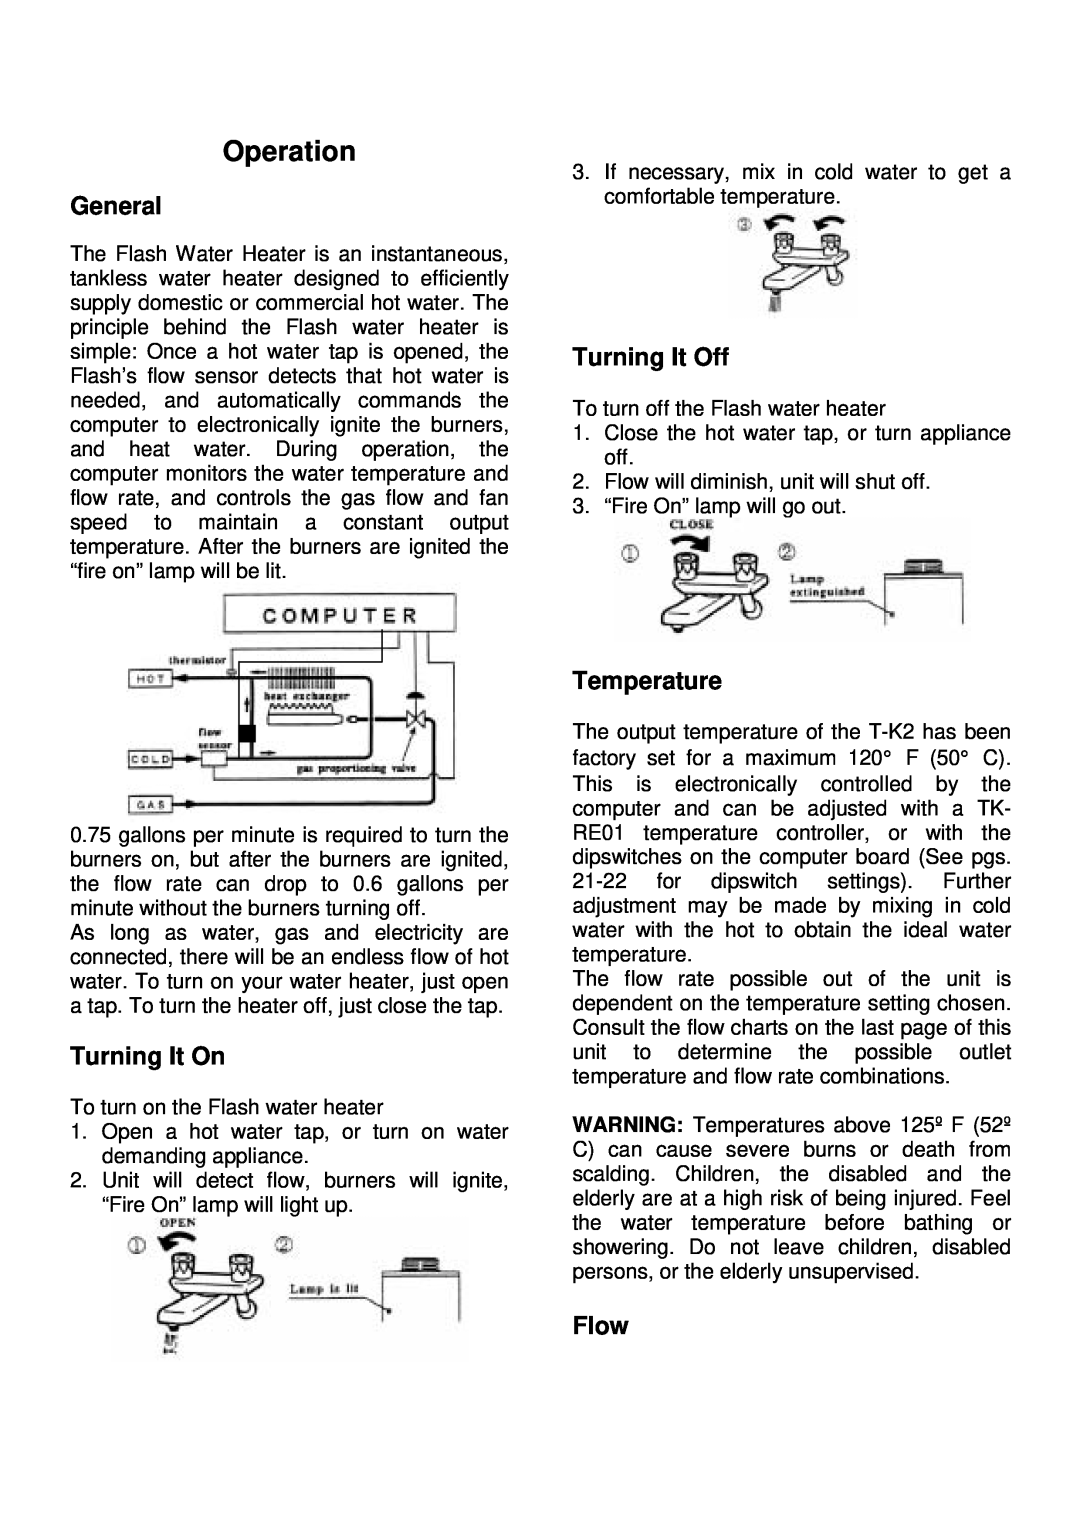 Whirlpool T-K2 installation manual Operation, General, Turning It Off, Turning It On, Temperature, Flow 